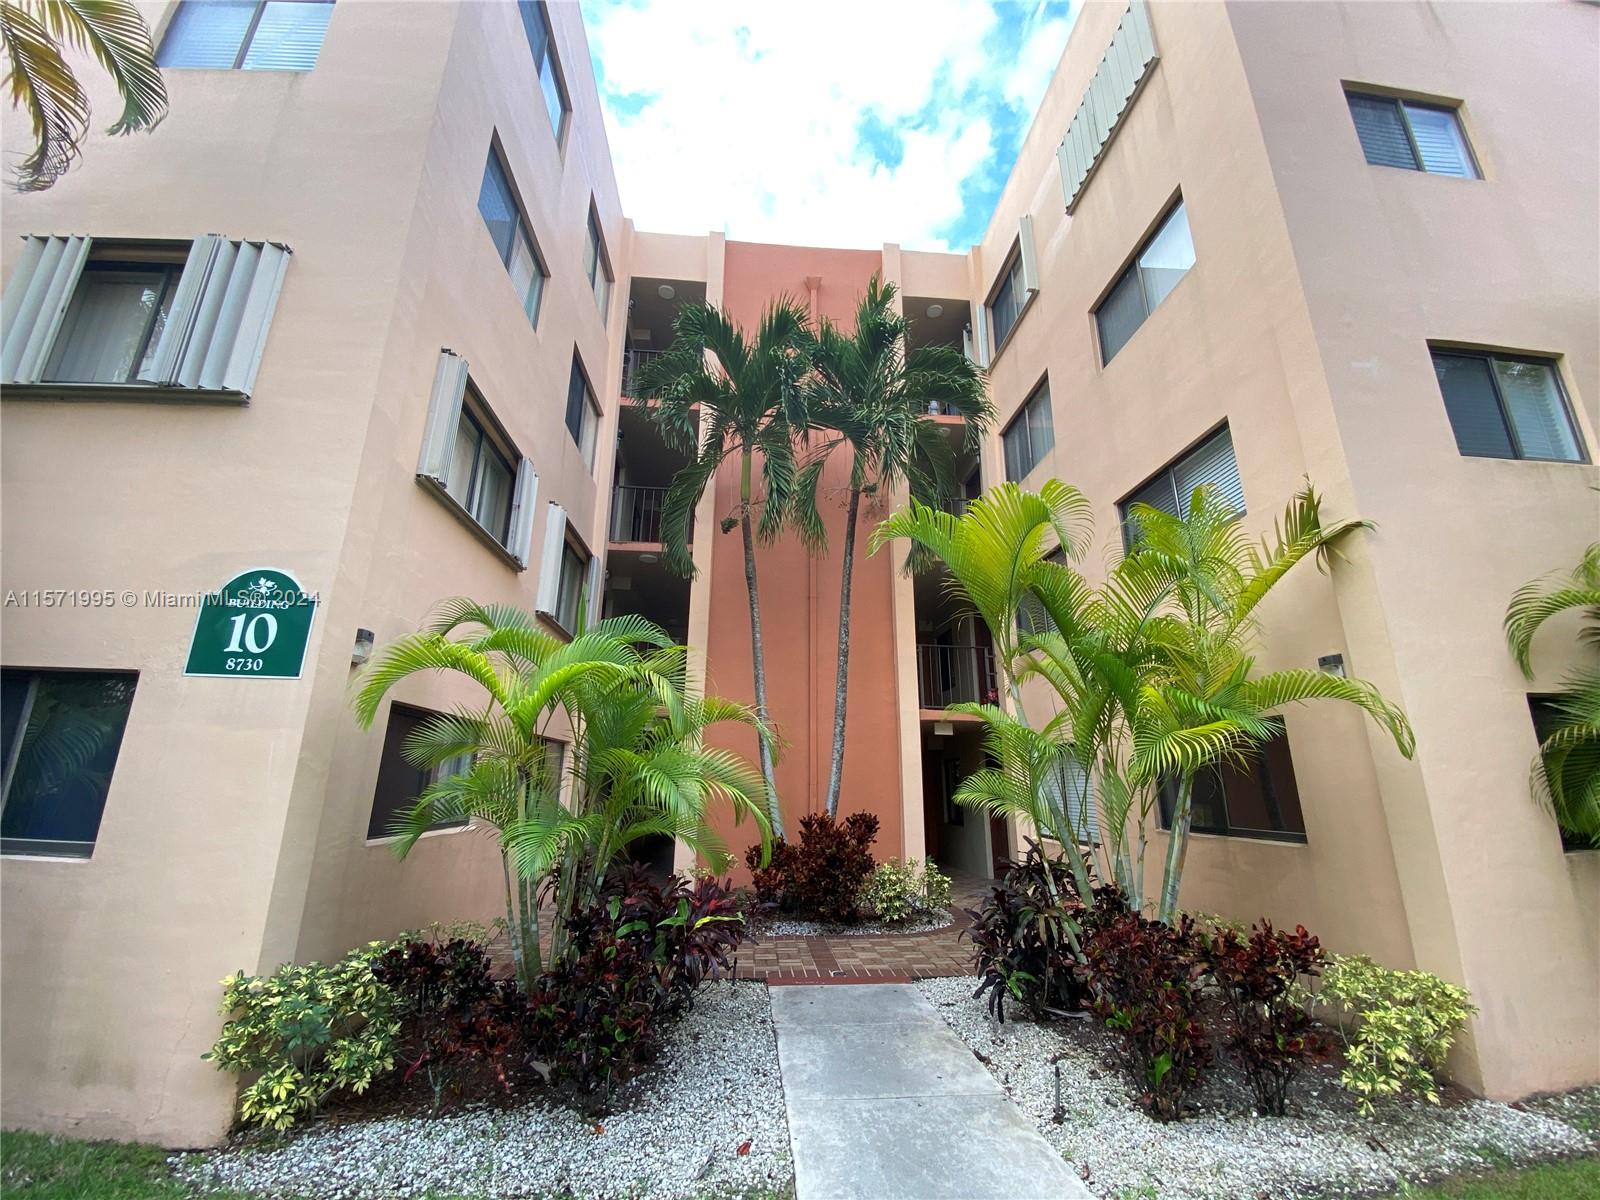 8730 SW 133rd Ave Rd 304, Miami, Florida 33183, 1 Bedroom Bedrooms, ,1 BathroomBathrooms,Residentiallease,For Rent,8730 SW 133rd Ave Rd 304,A11571995